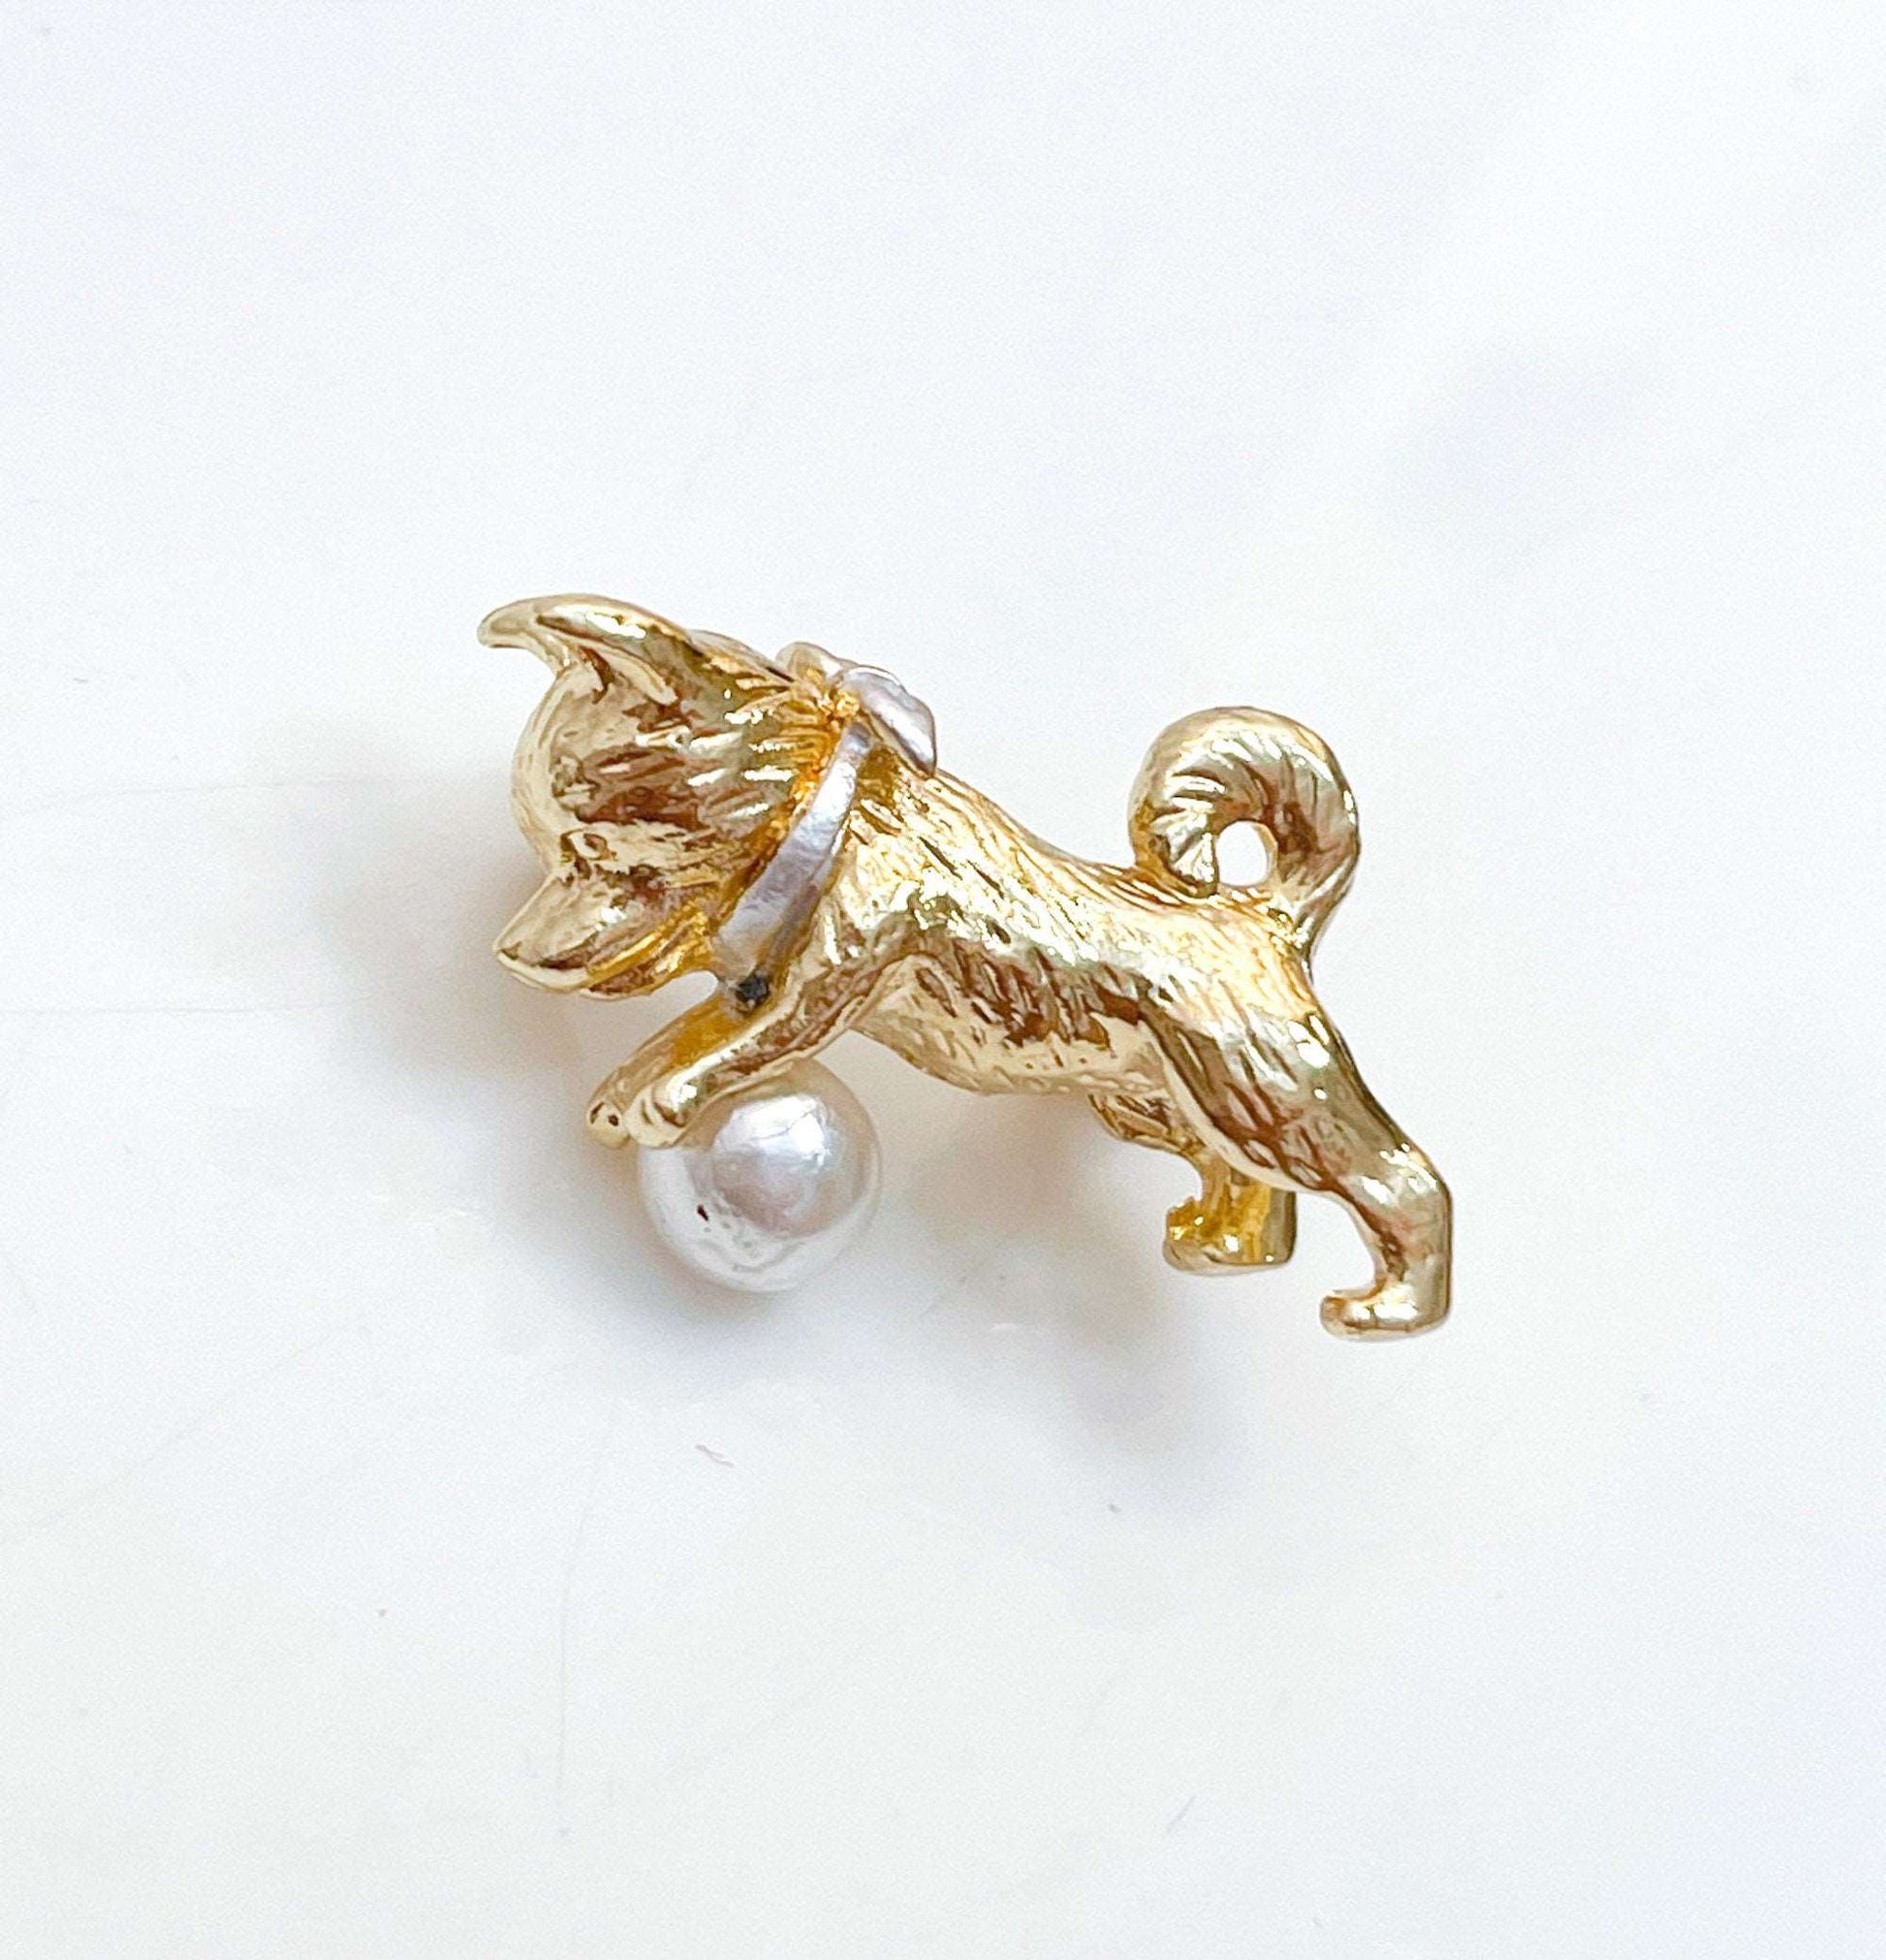 Gold Cute Dog Brooch | Gift for Dog Lovers | Puppy Dog with Ball Pin